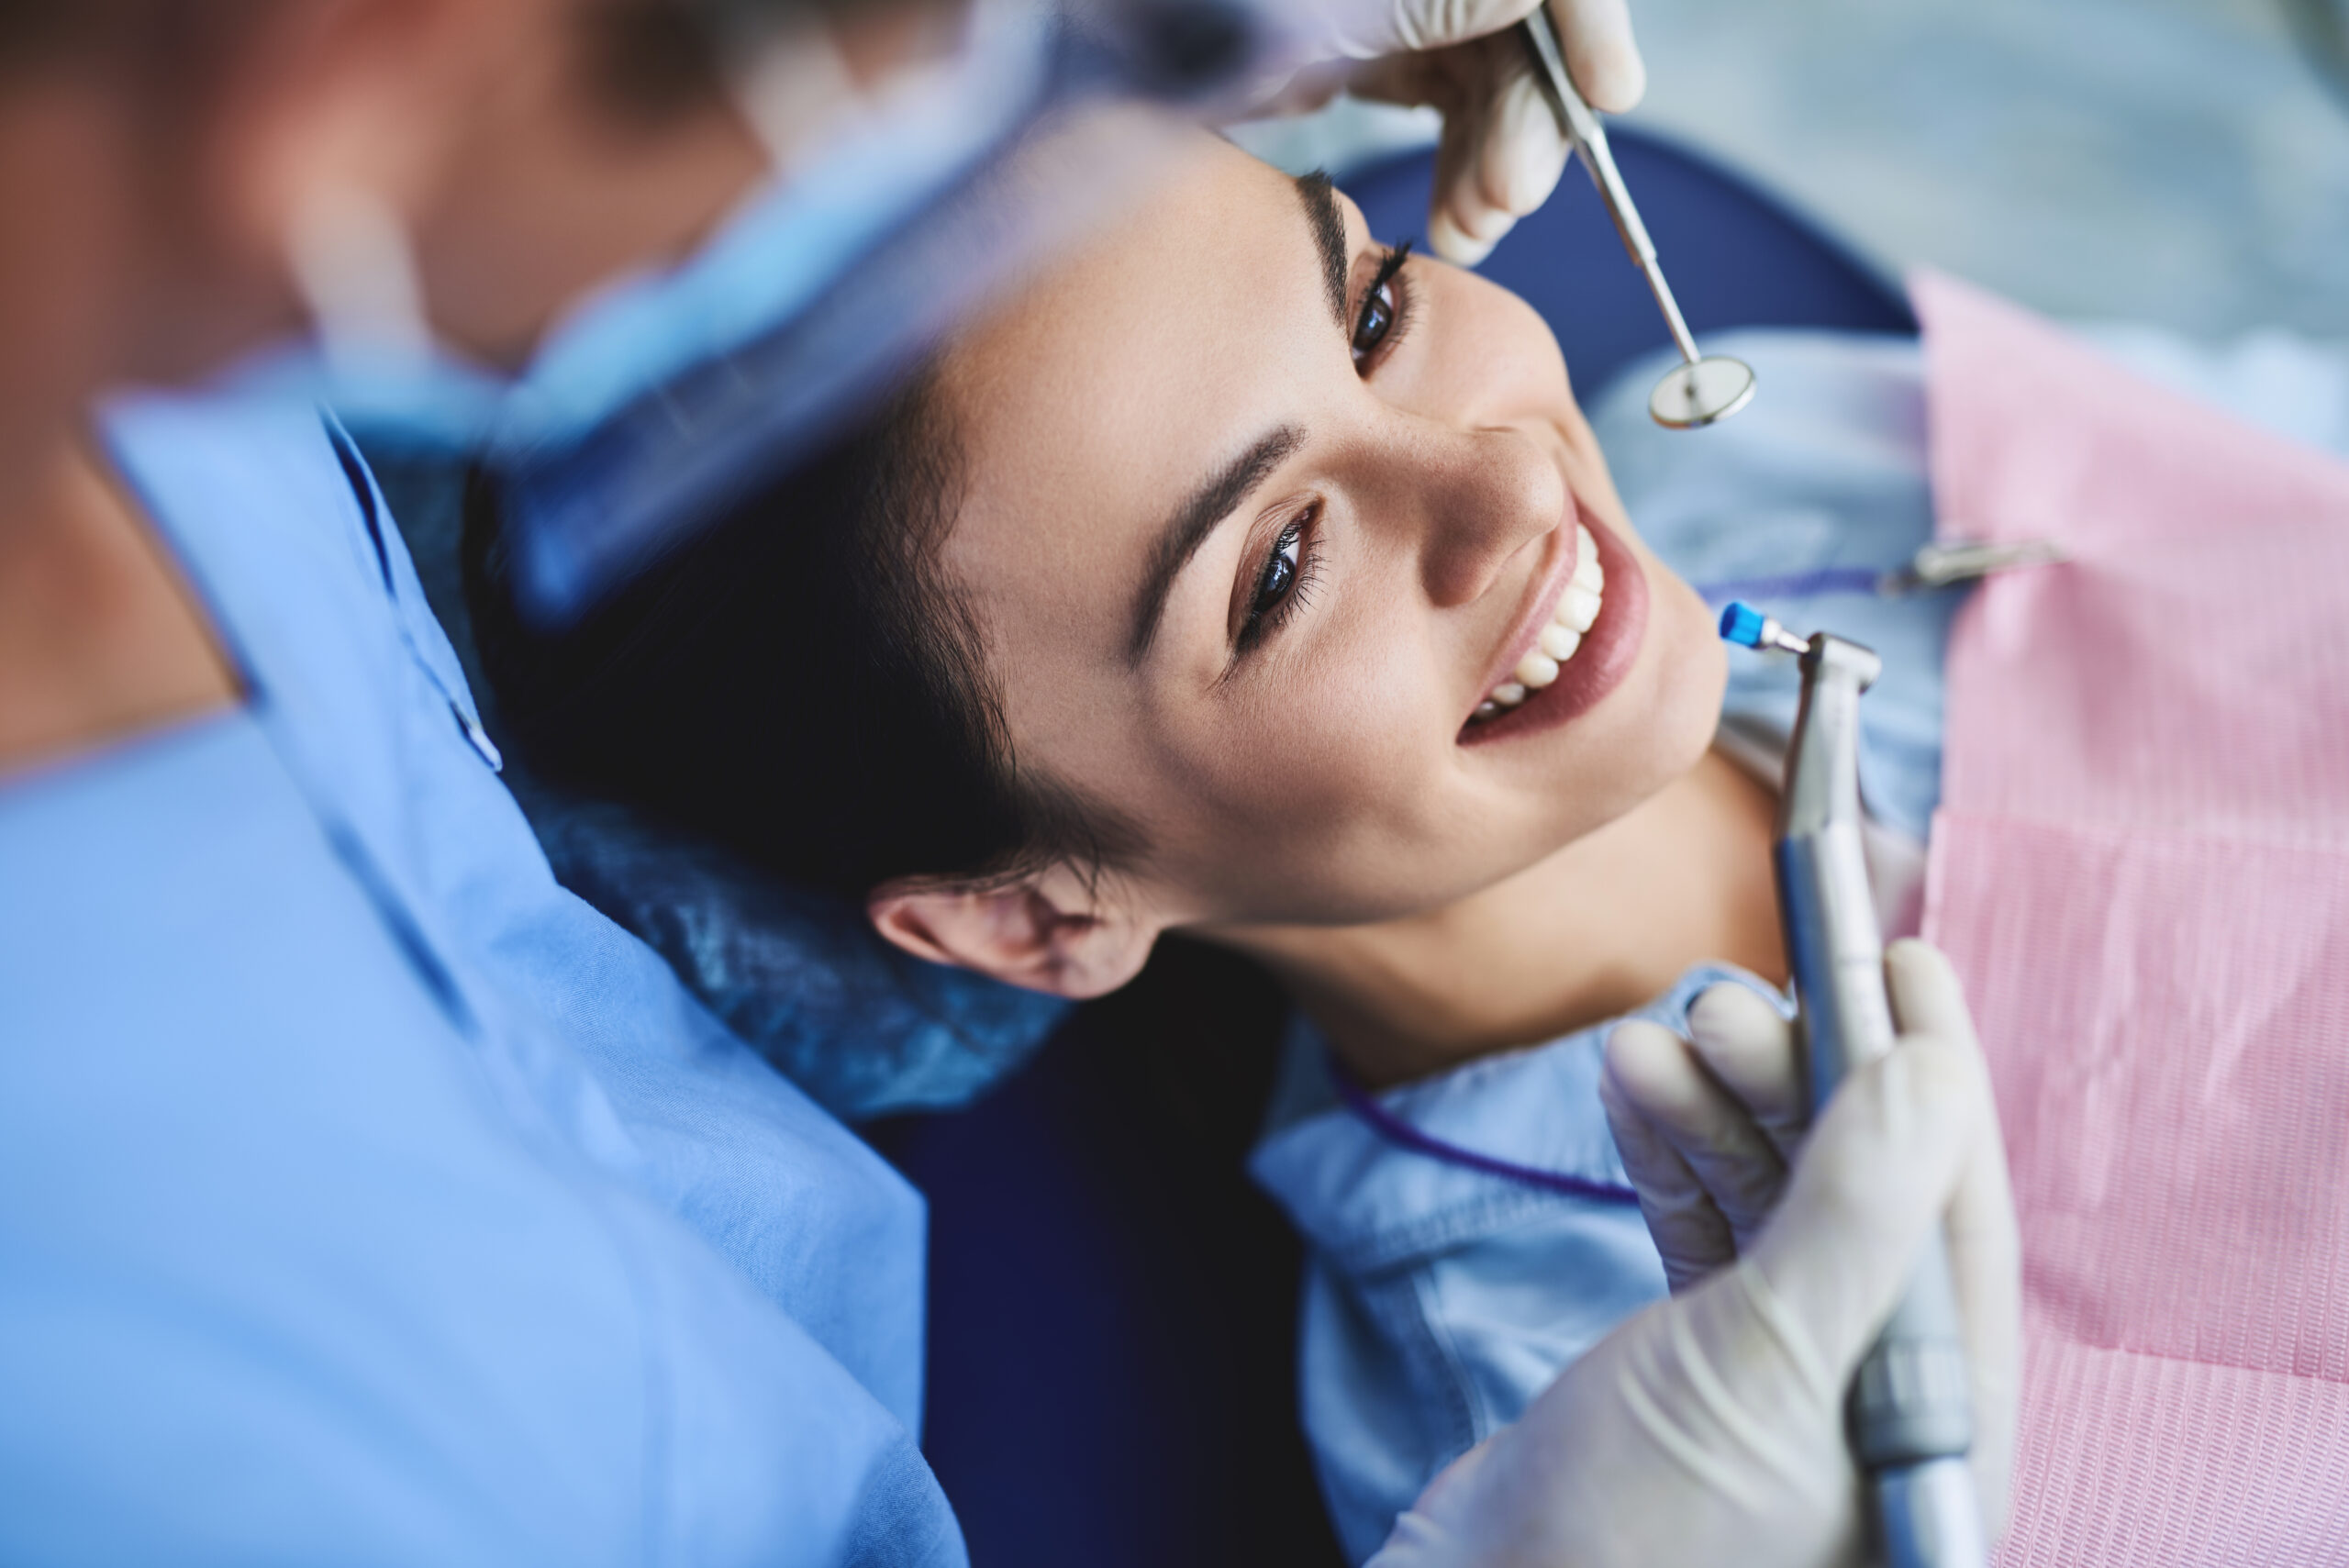 Close up portrait of charming woman sitting in dental chair while stomatologist holding polisher and mirror. Girl is smiling